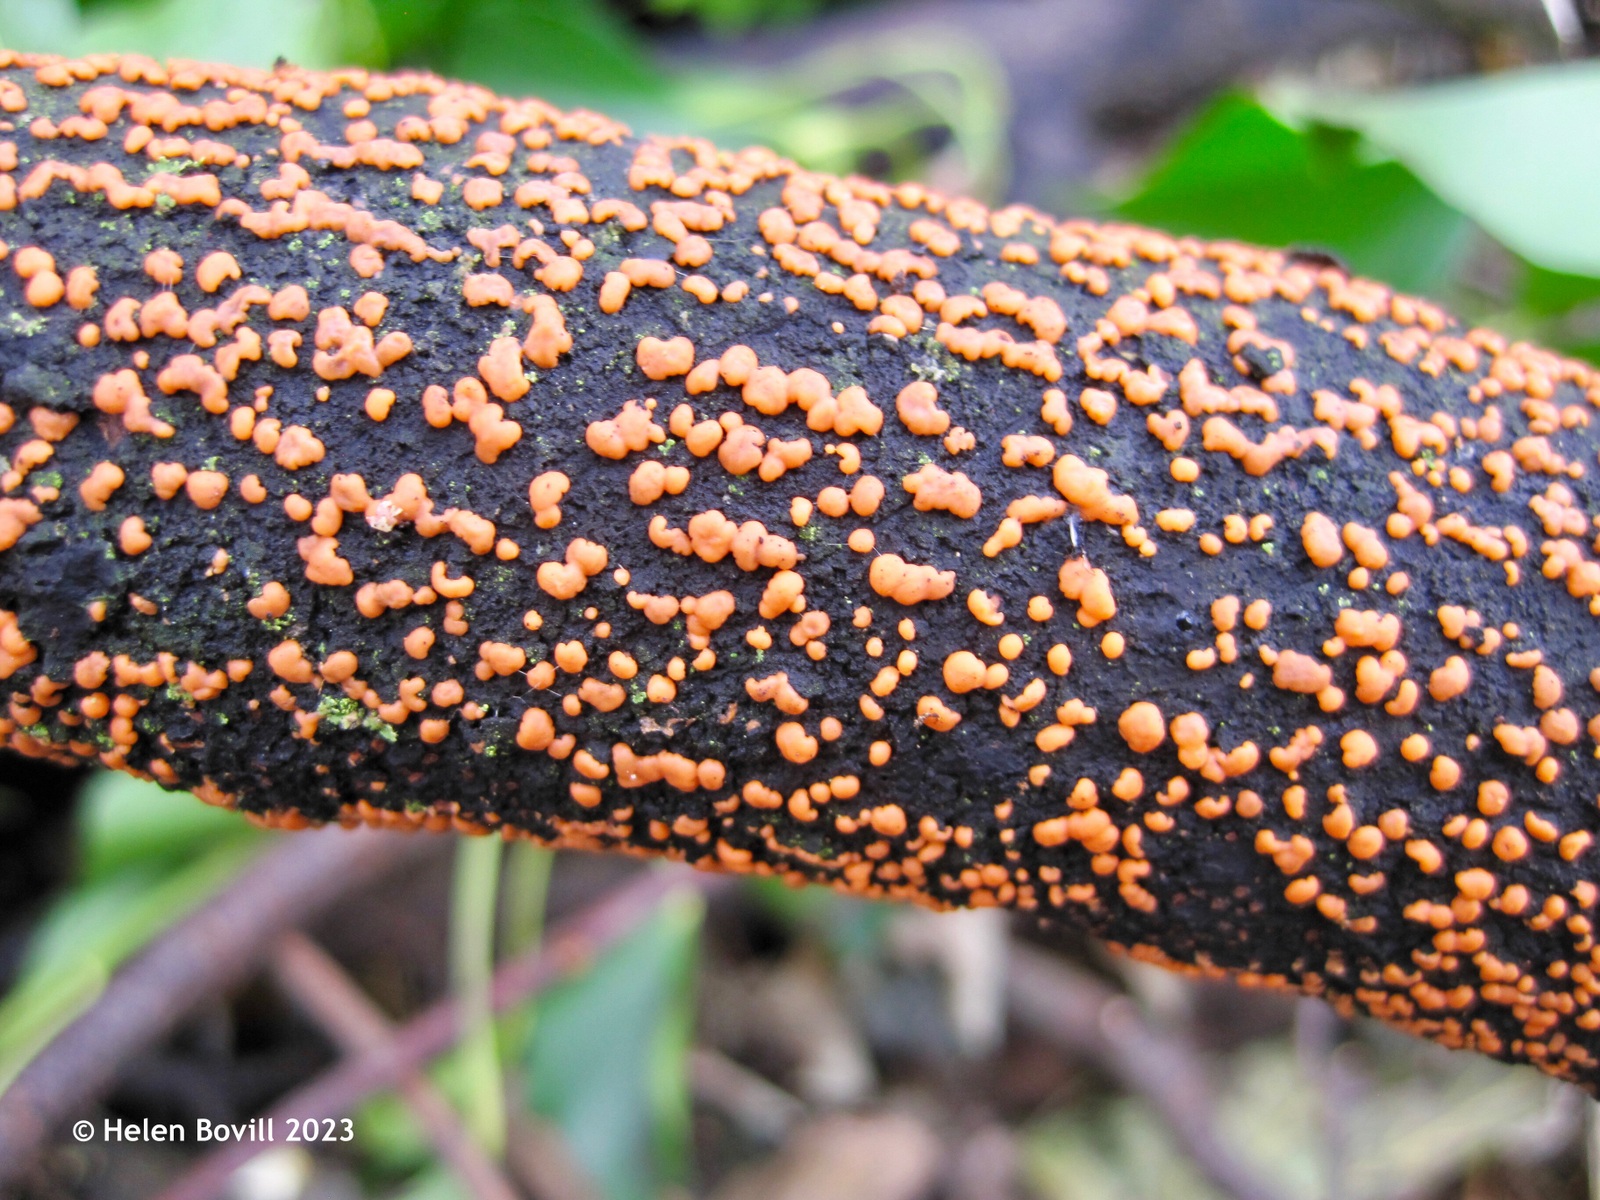 Coral spot fungus on a fallen branch in the cemetery